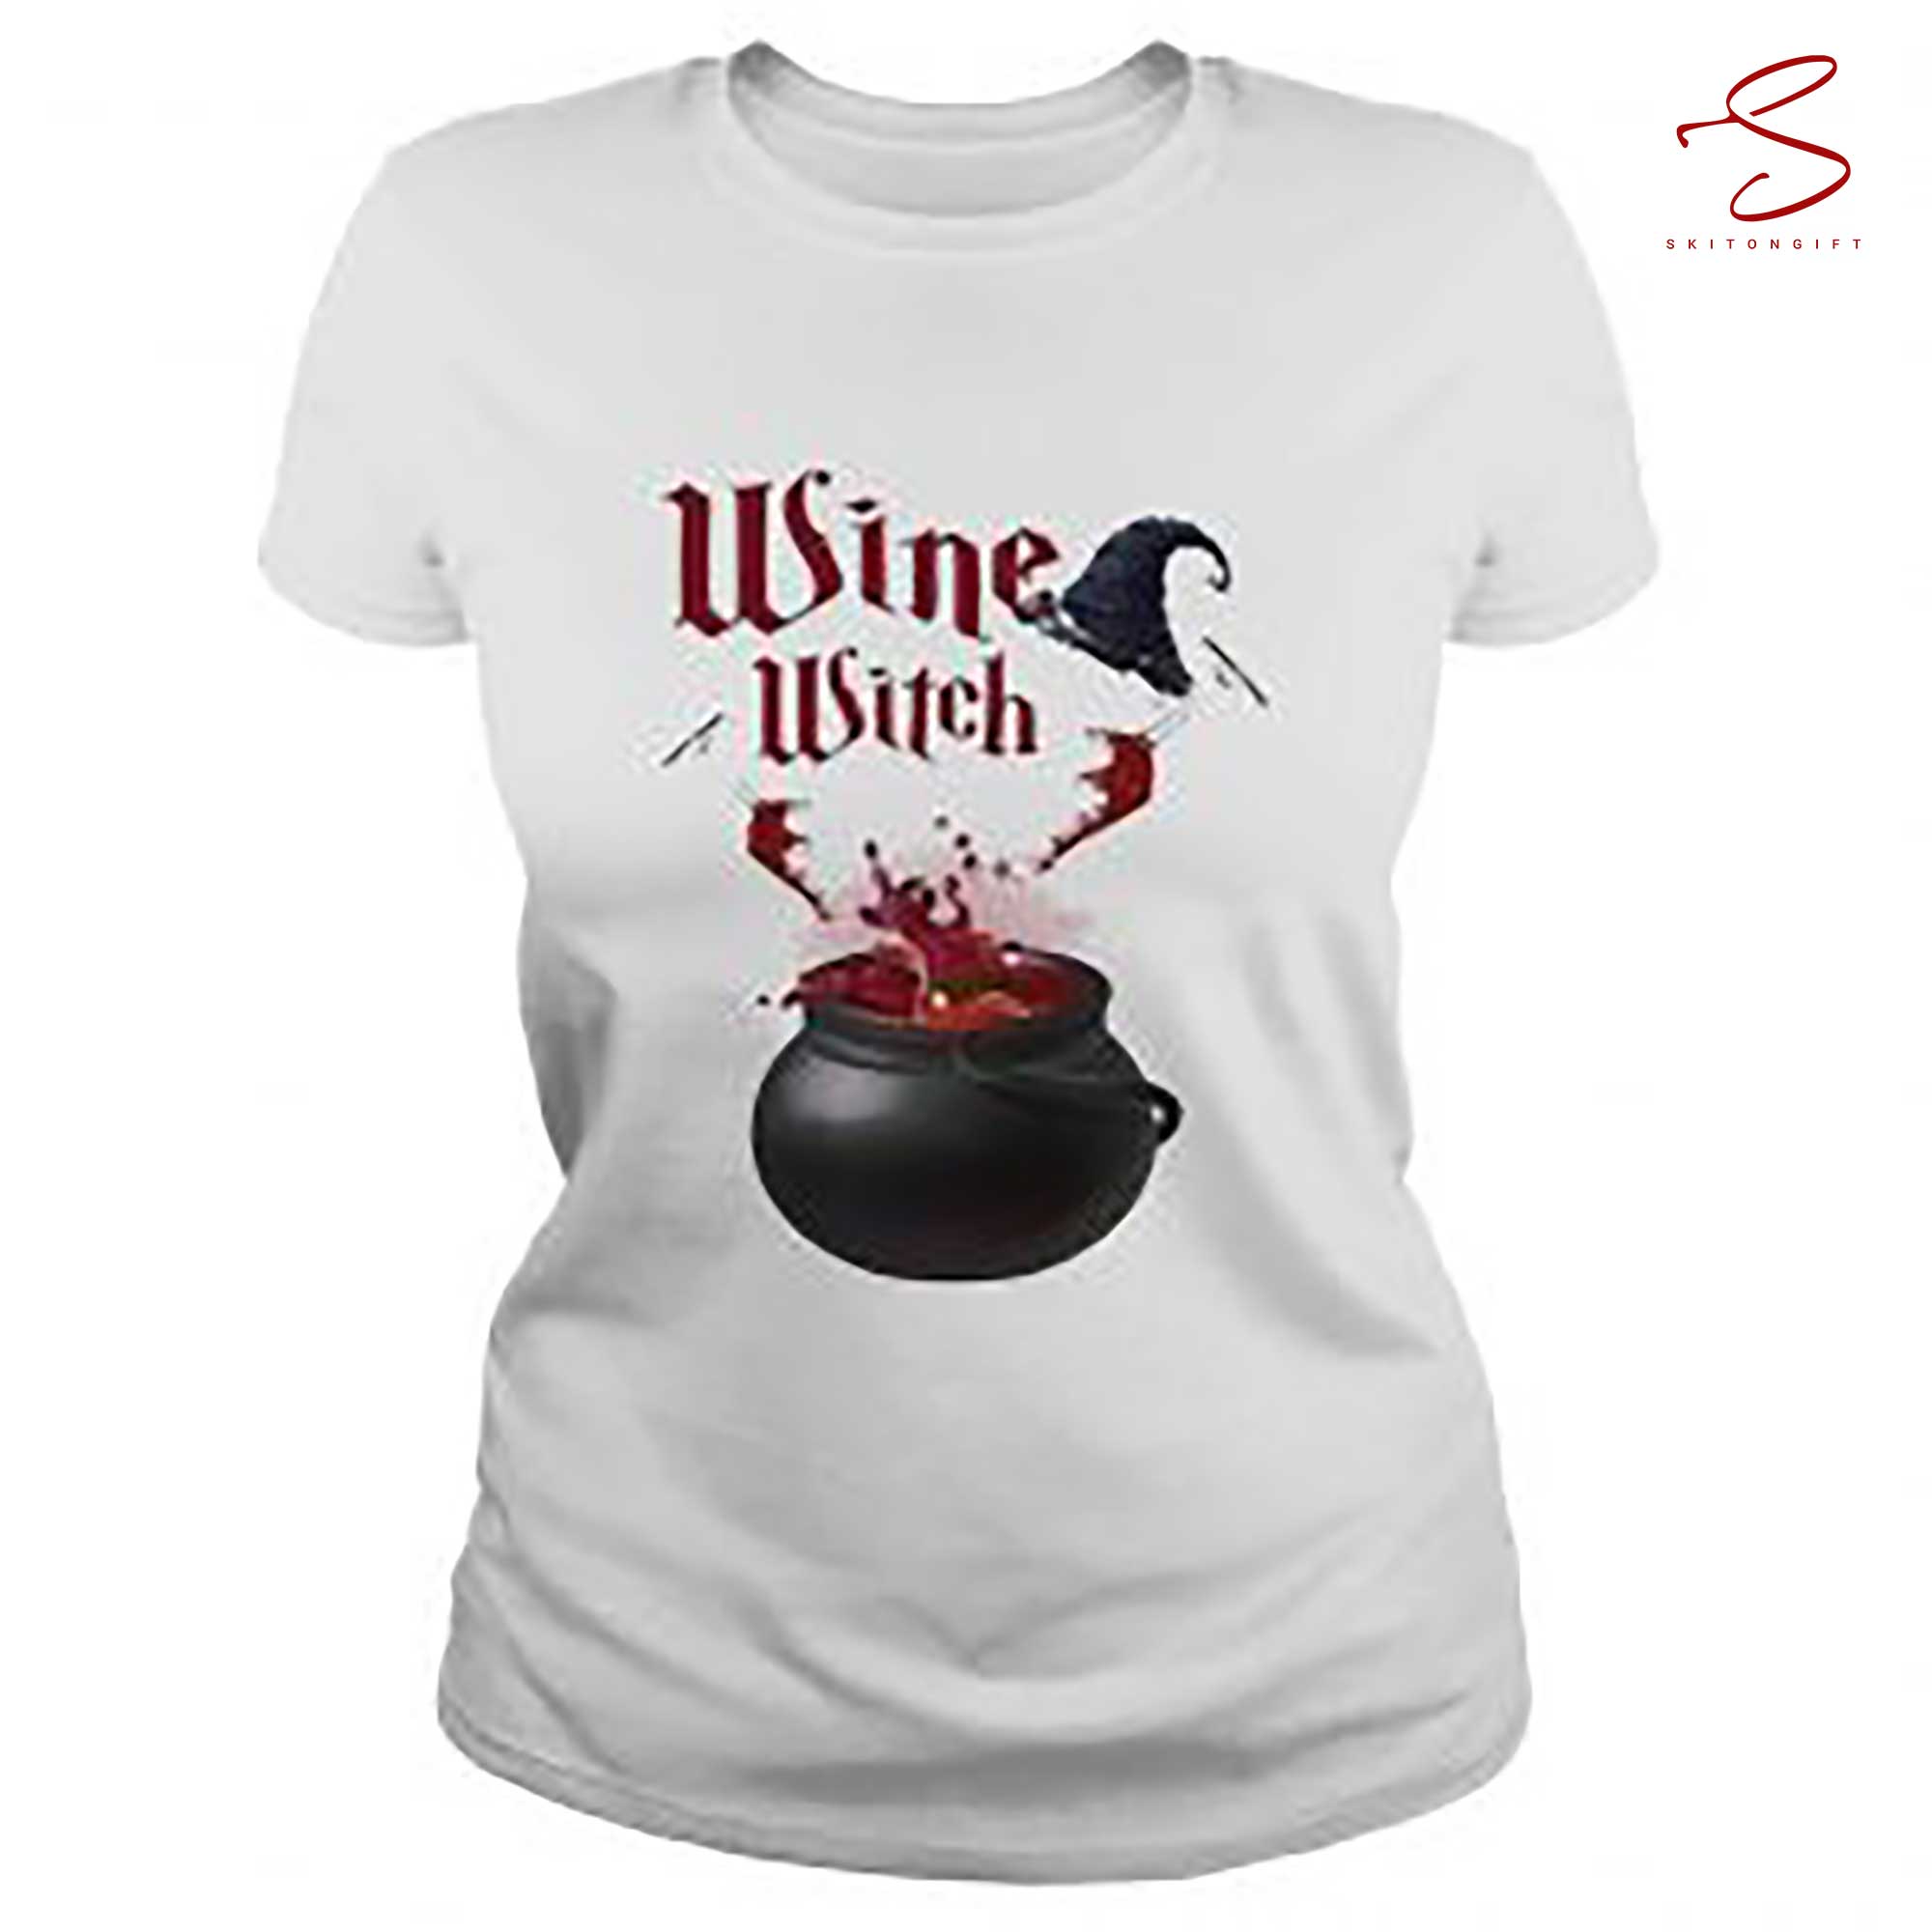 Skitongift Wine Witch Halloween T Shirt Funny Shirt, gifts for Dad Mom,Gifts for Him, Her, Gifts for Dad Mom